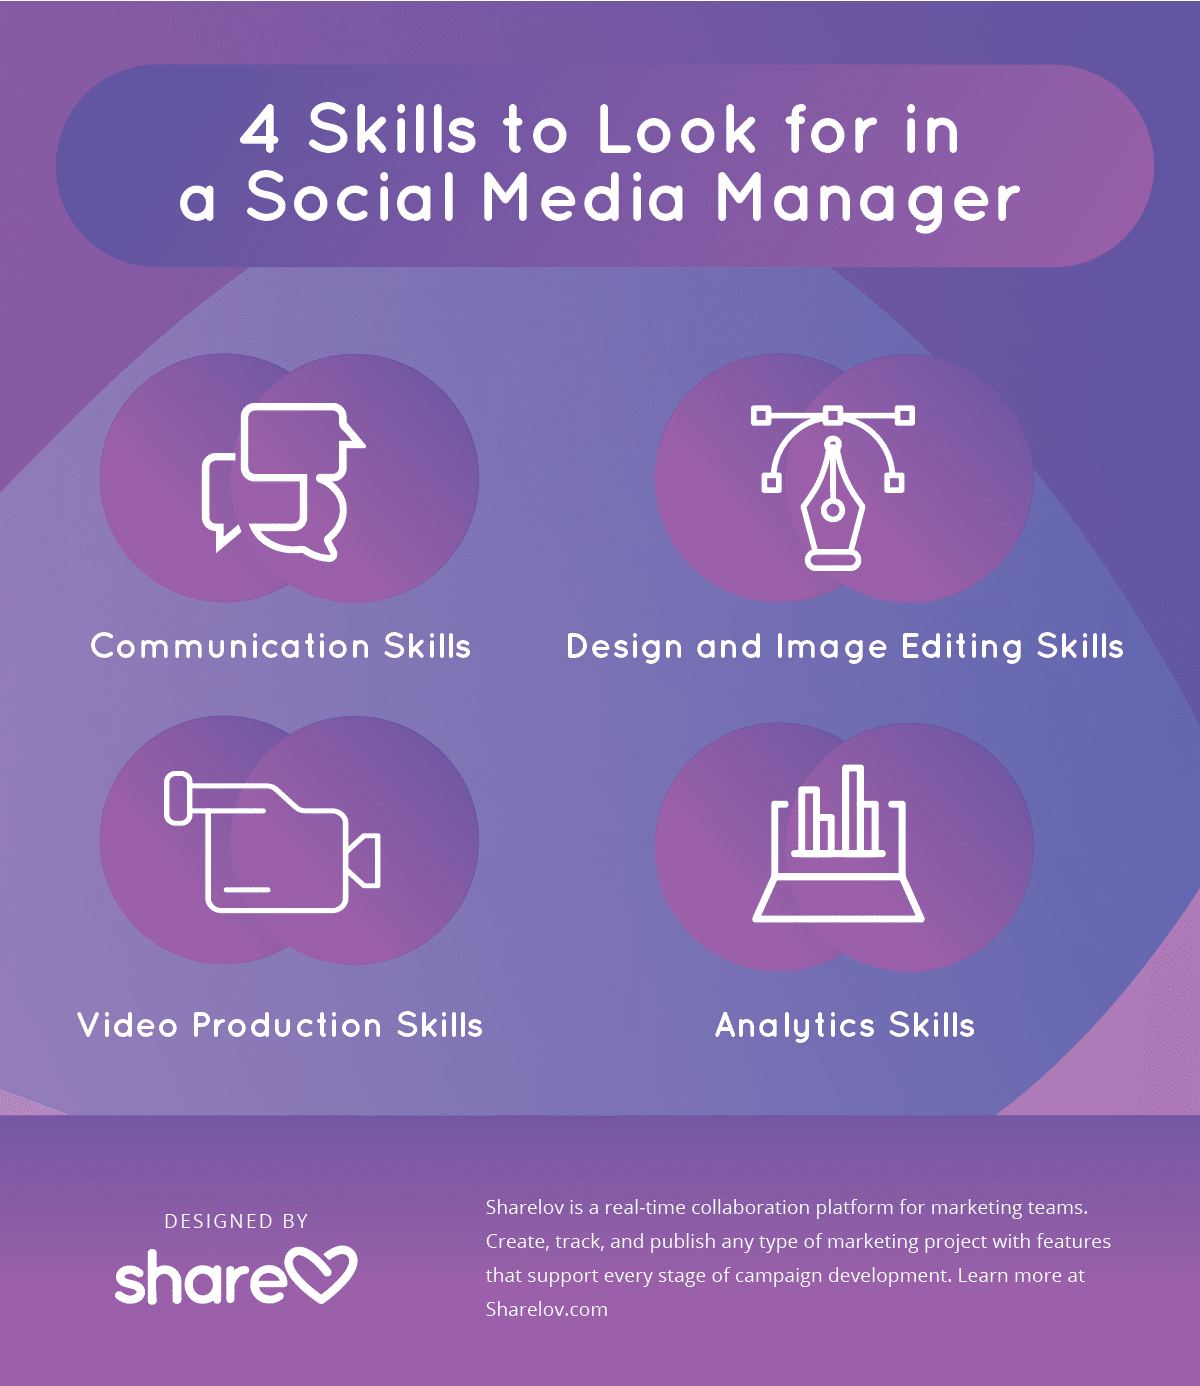 4 Skills to Look for in a Social Media Manager infographic